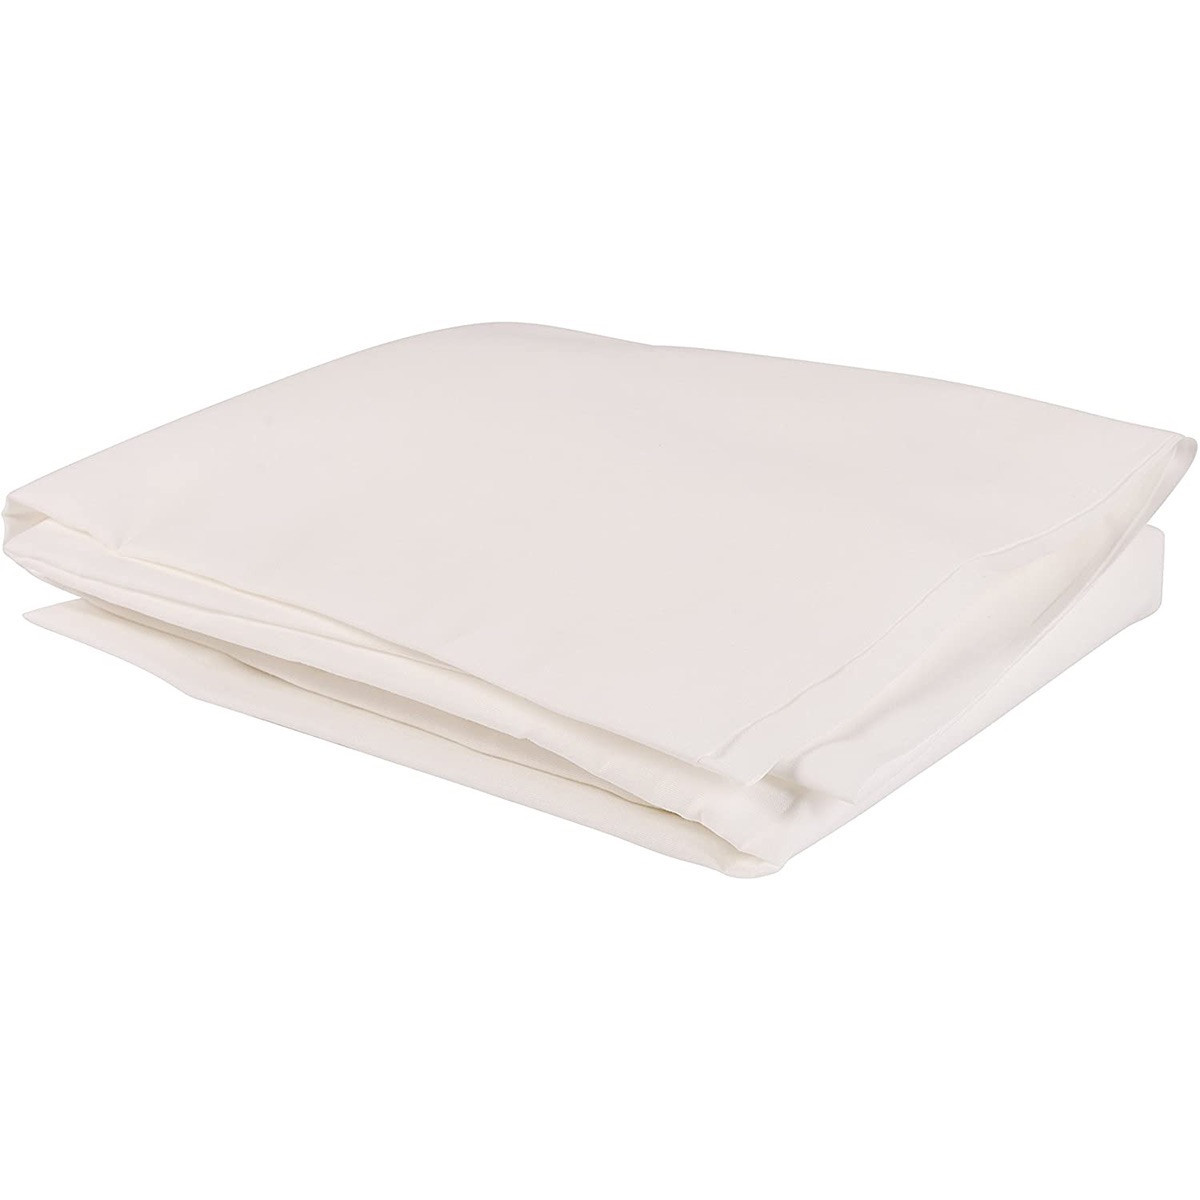 Standard Hospital Bed Fitted Sheets - FREE Shipping